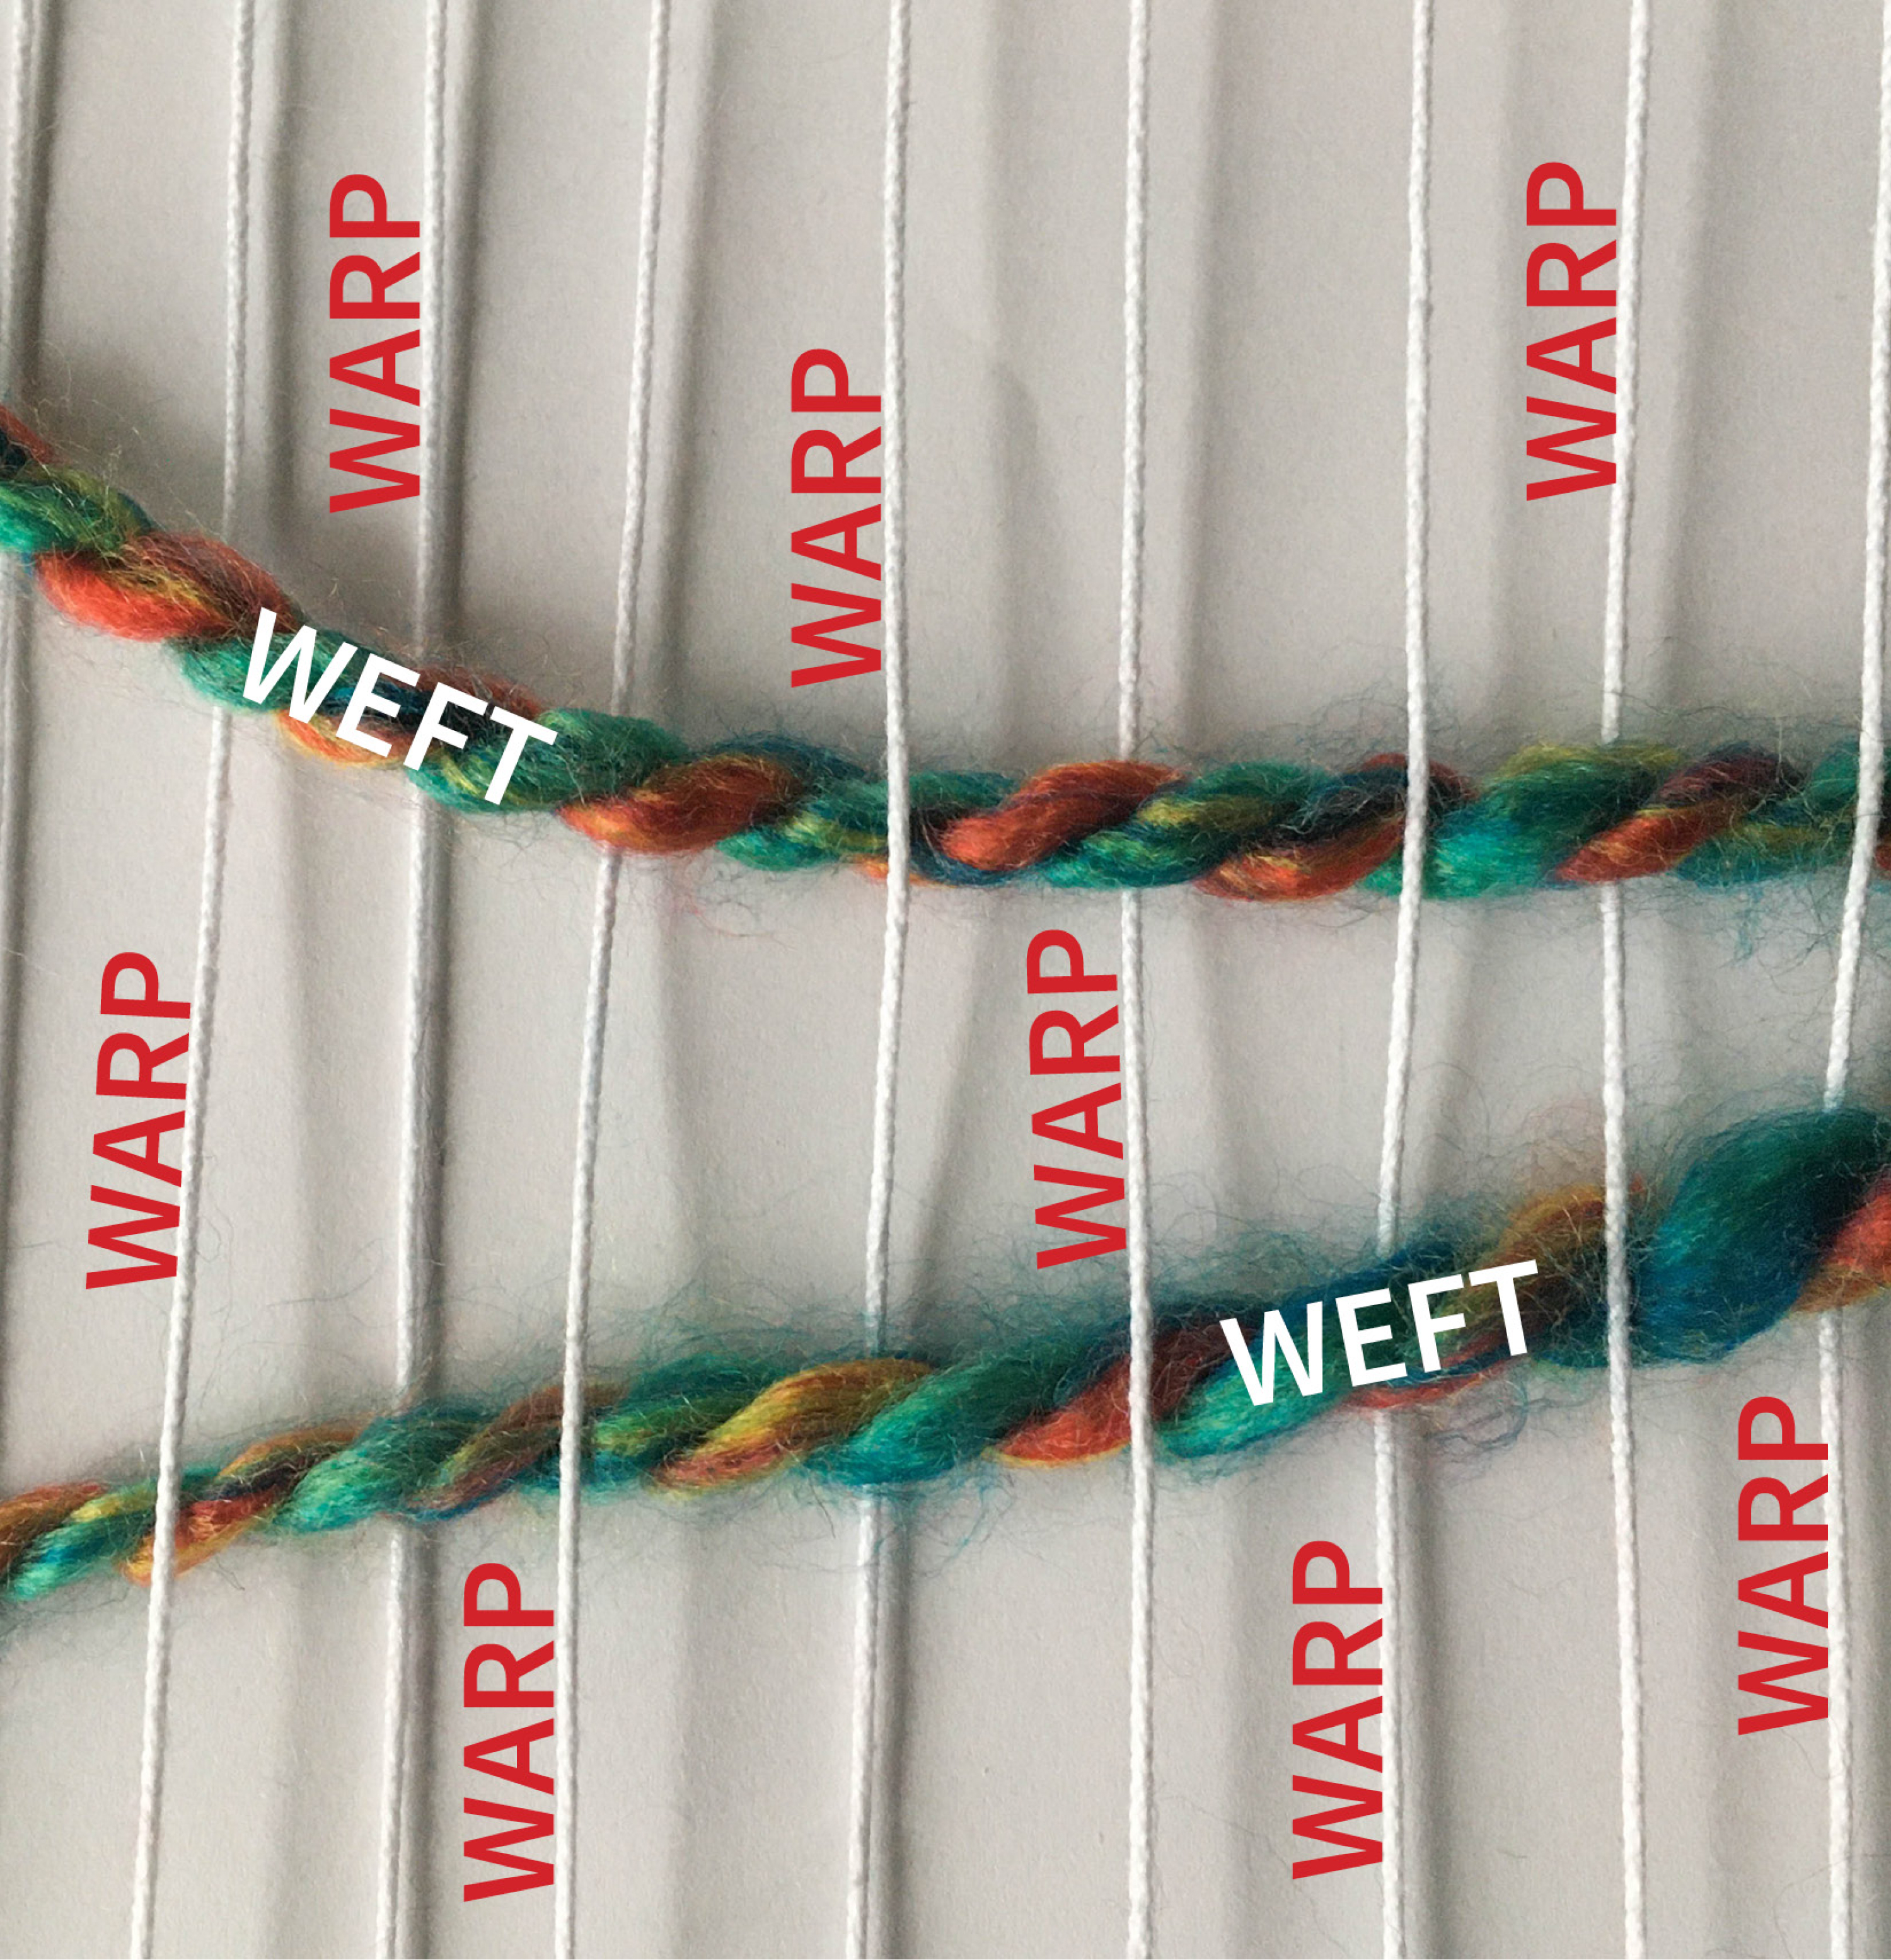 Close-up of crossed yarn with vertical threads labeled “warp” and horizontal yarns threads labeled “weft”.